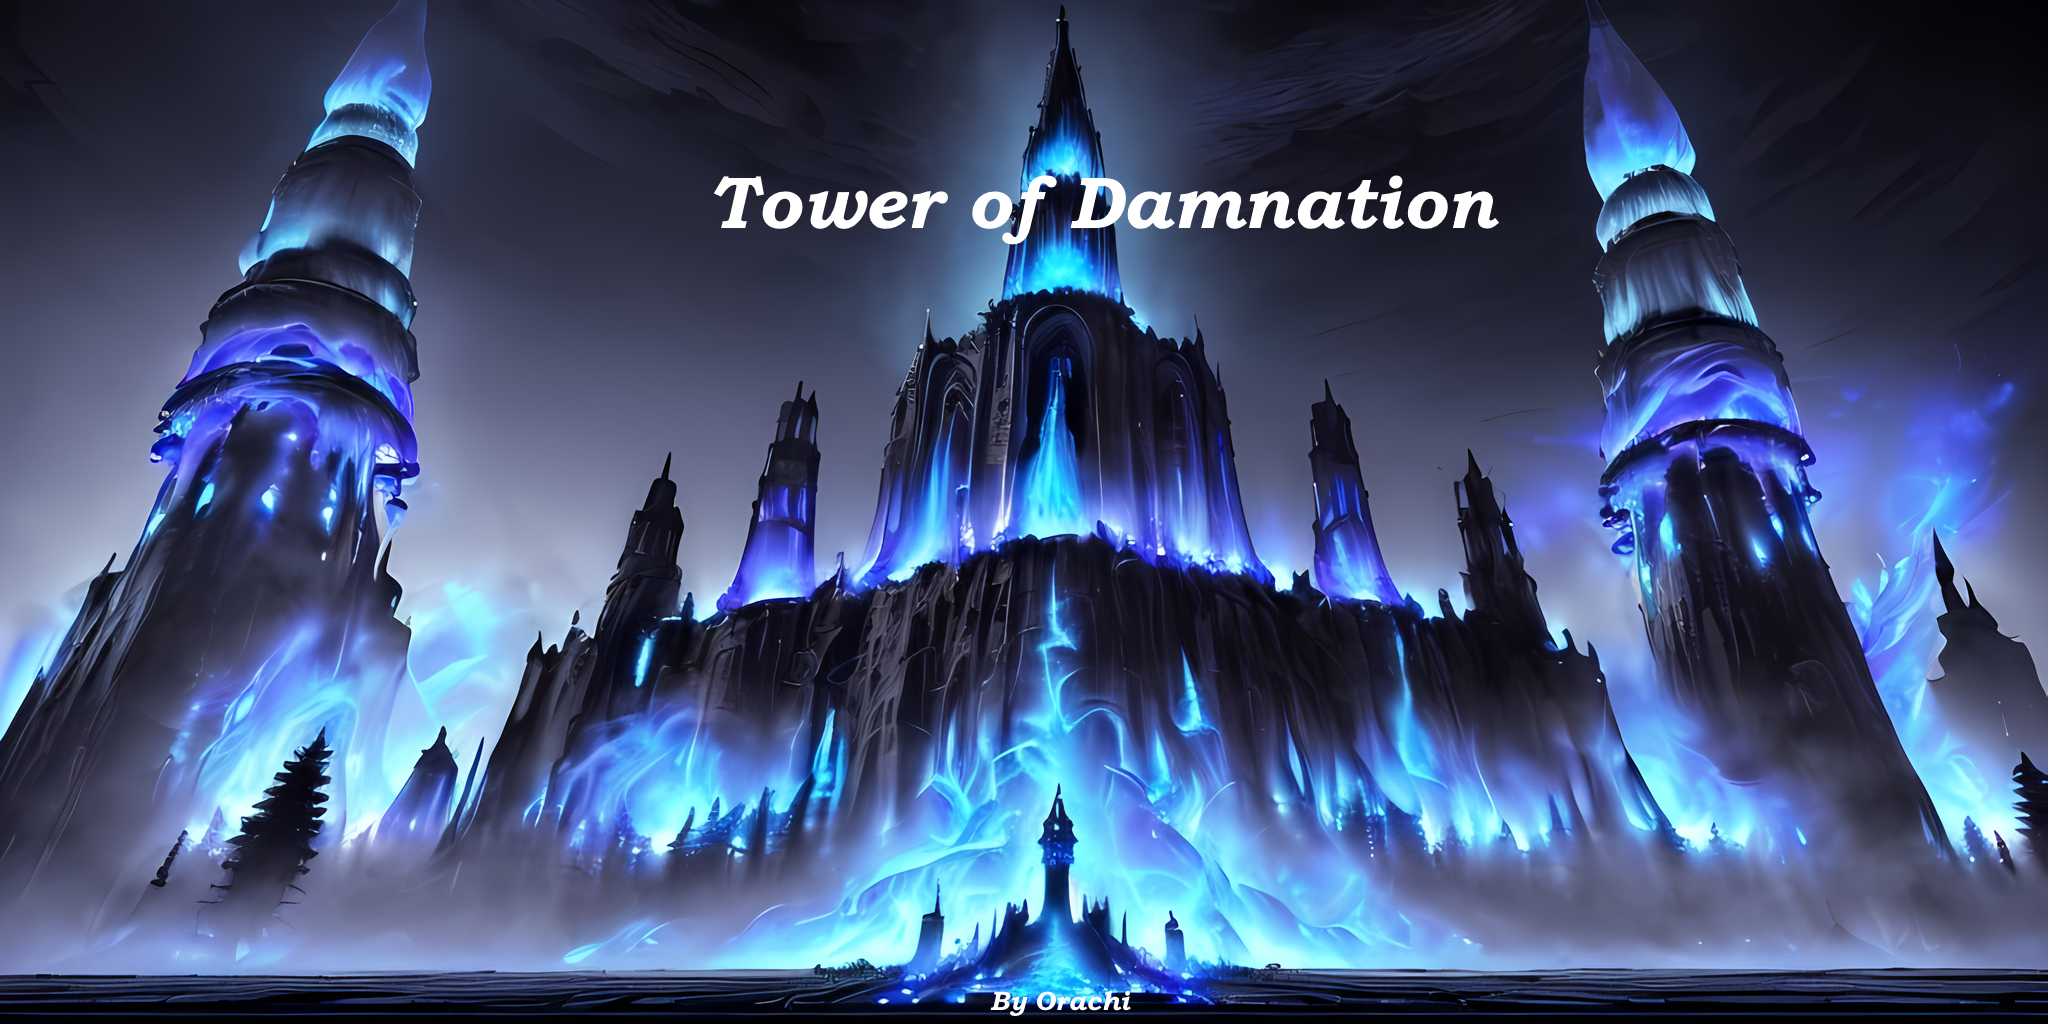 Tower of Damnation